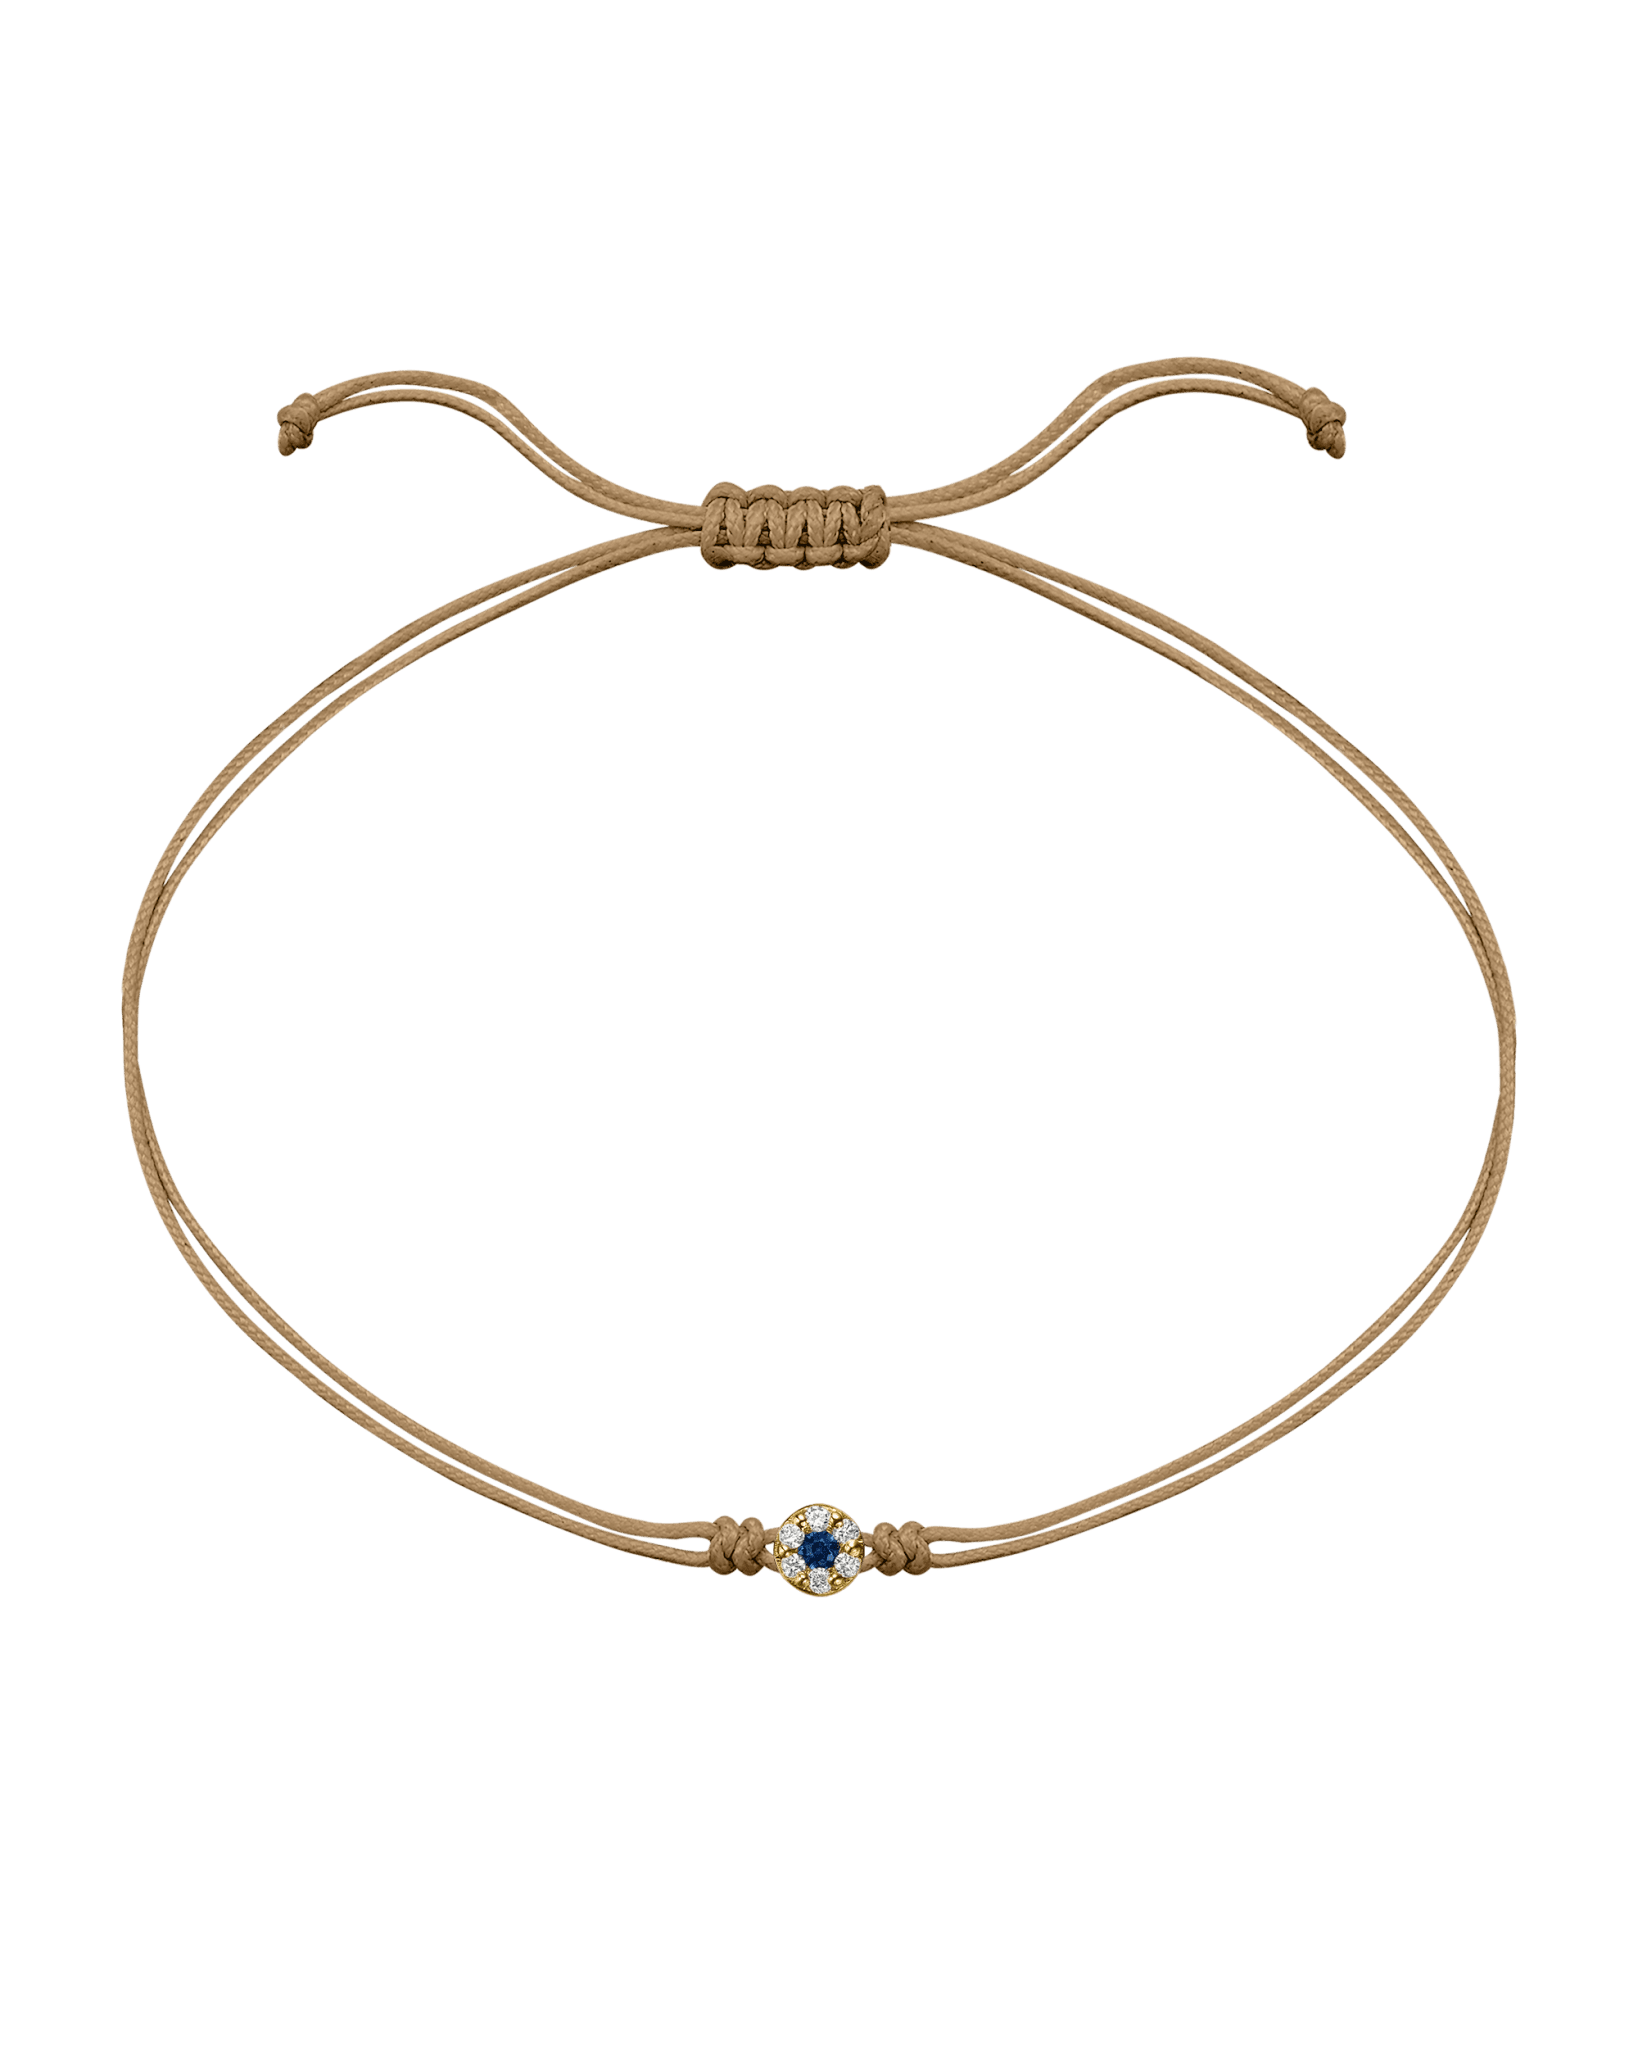 String of Love Diamond and Gemstone - 14K Yellow Gold Bracelet 14K Solid Gold Camel Sapphire 